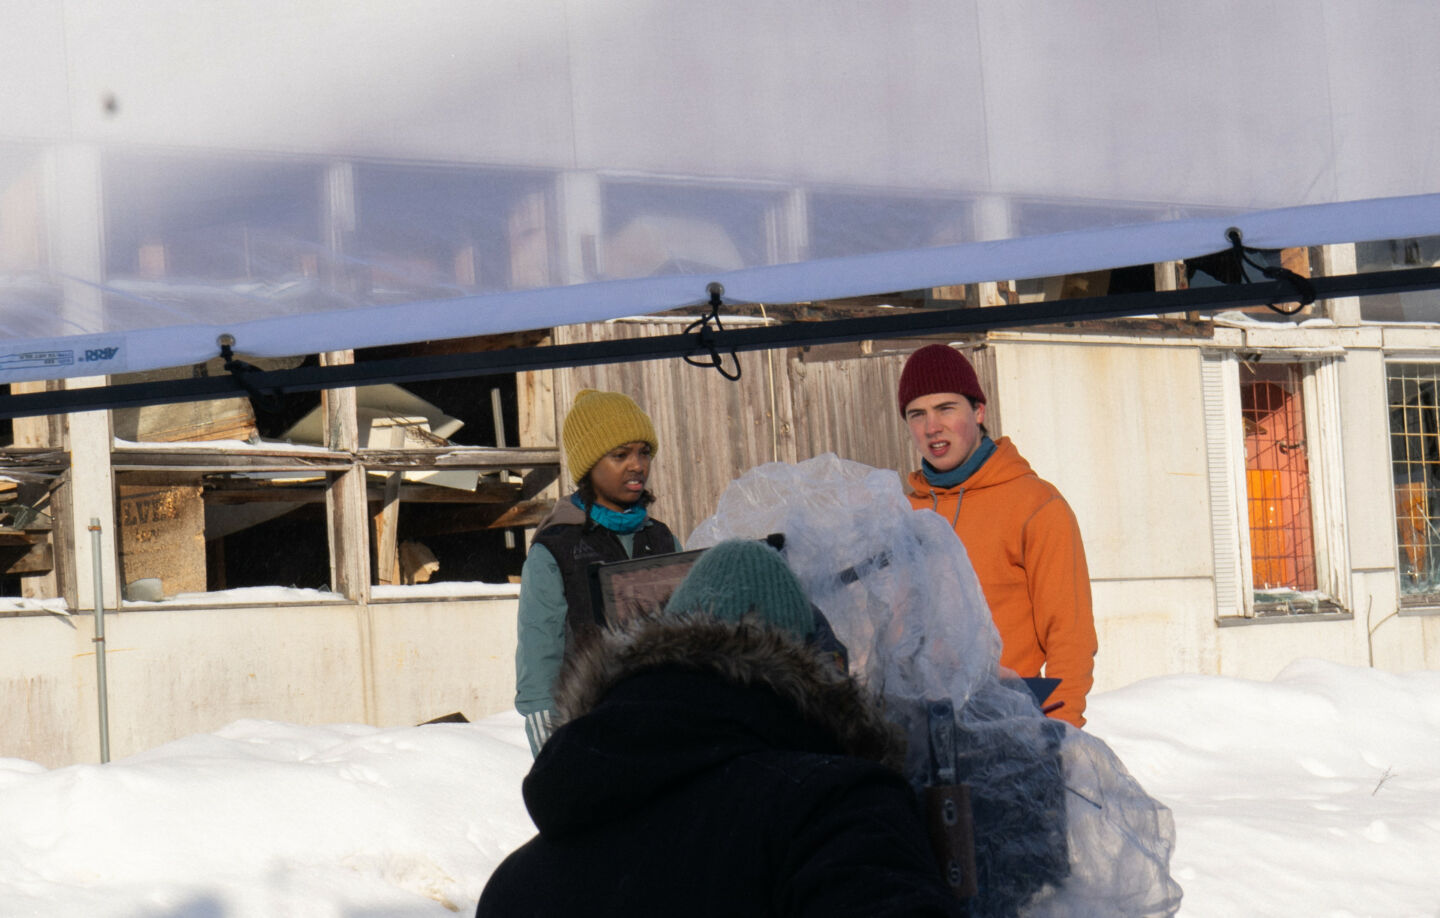 Behind the scenes on Critical Point - Kriittinen piste - a television mini-series filmed in Ylitornio, a Finnish Lapland filming location